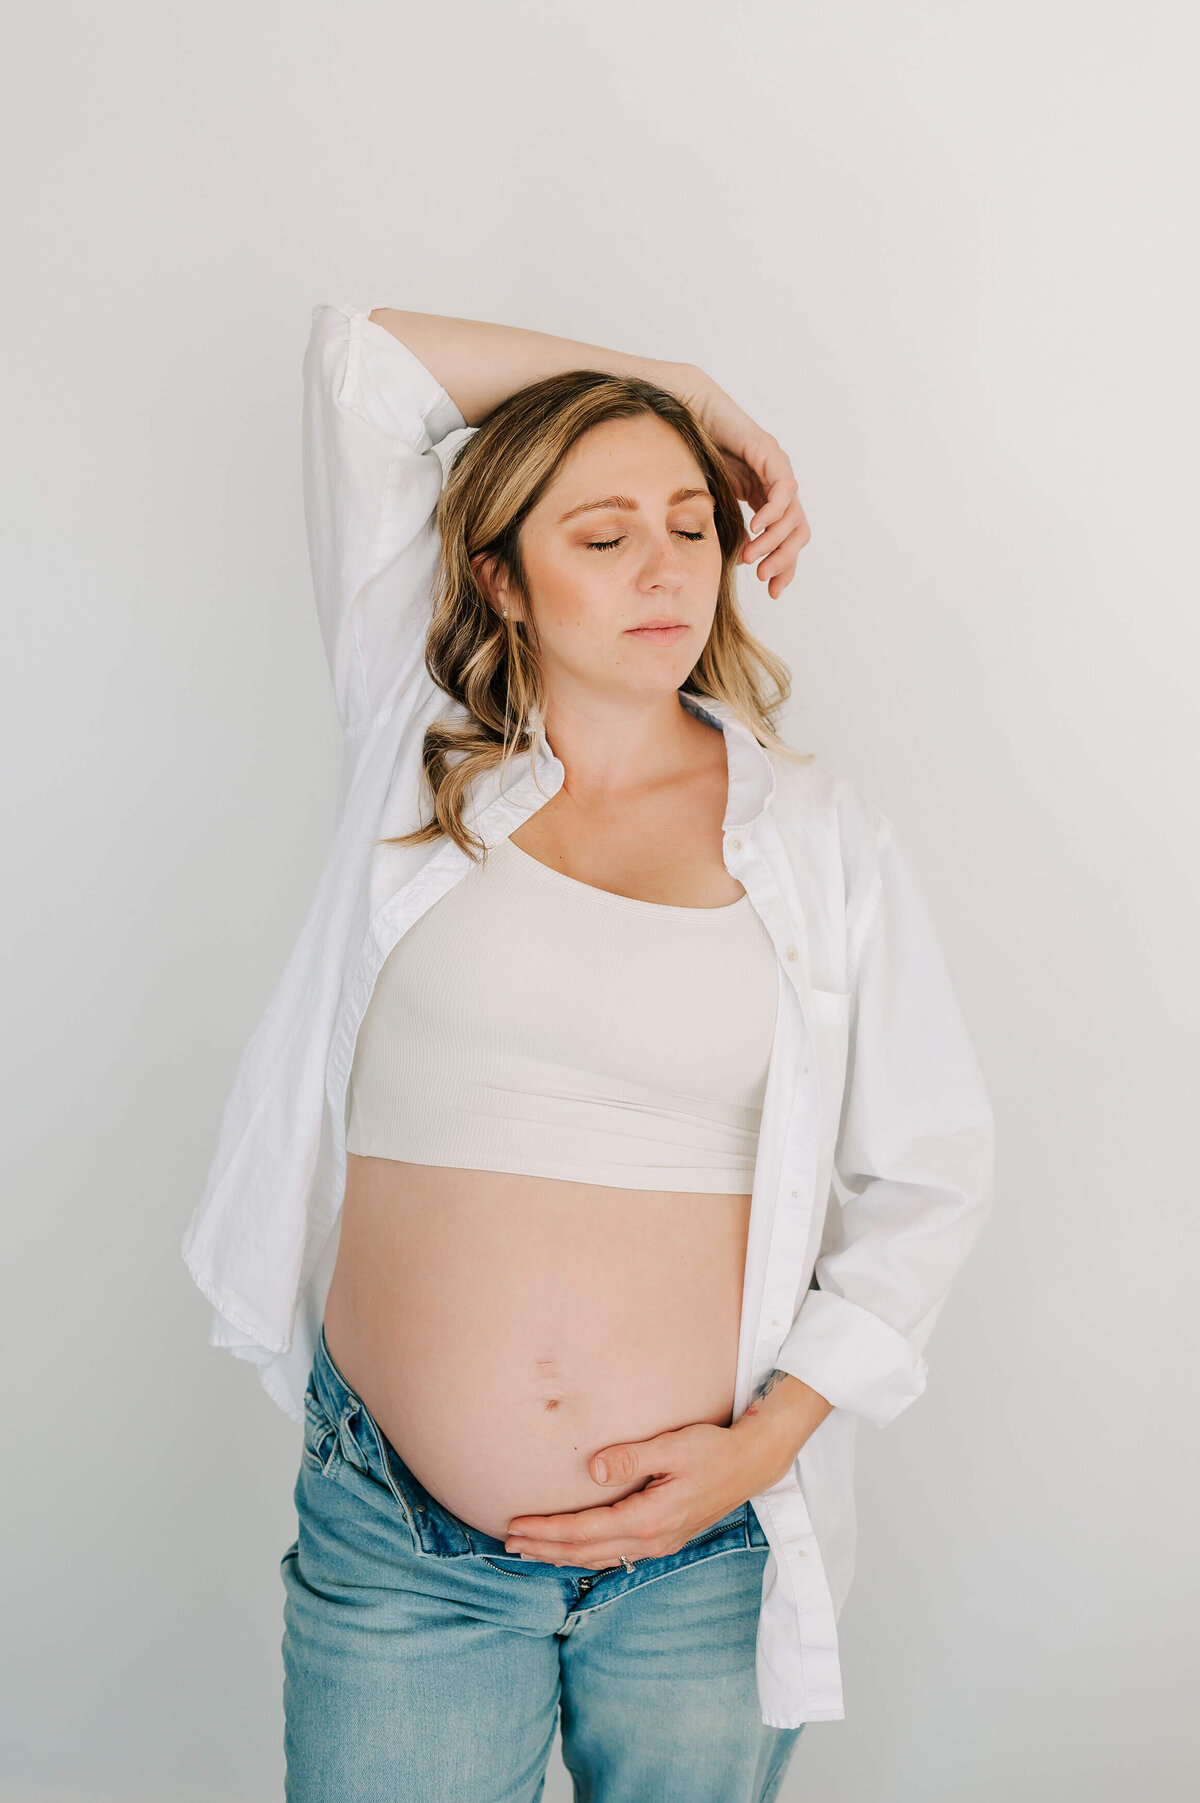 pregnant mom in jeans holding baby bump during studio maternity session in Springfield Missouri